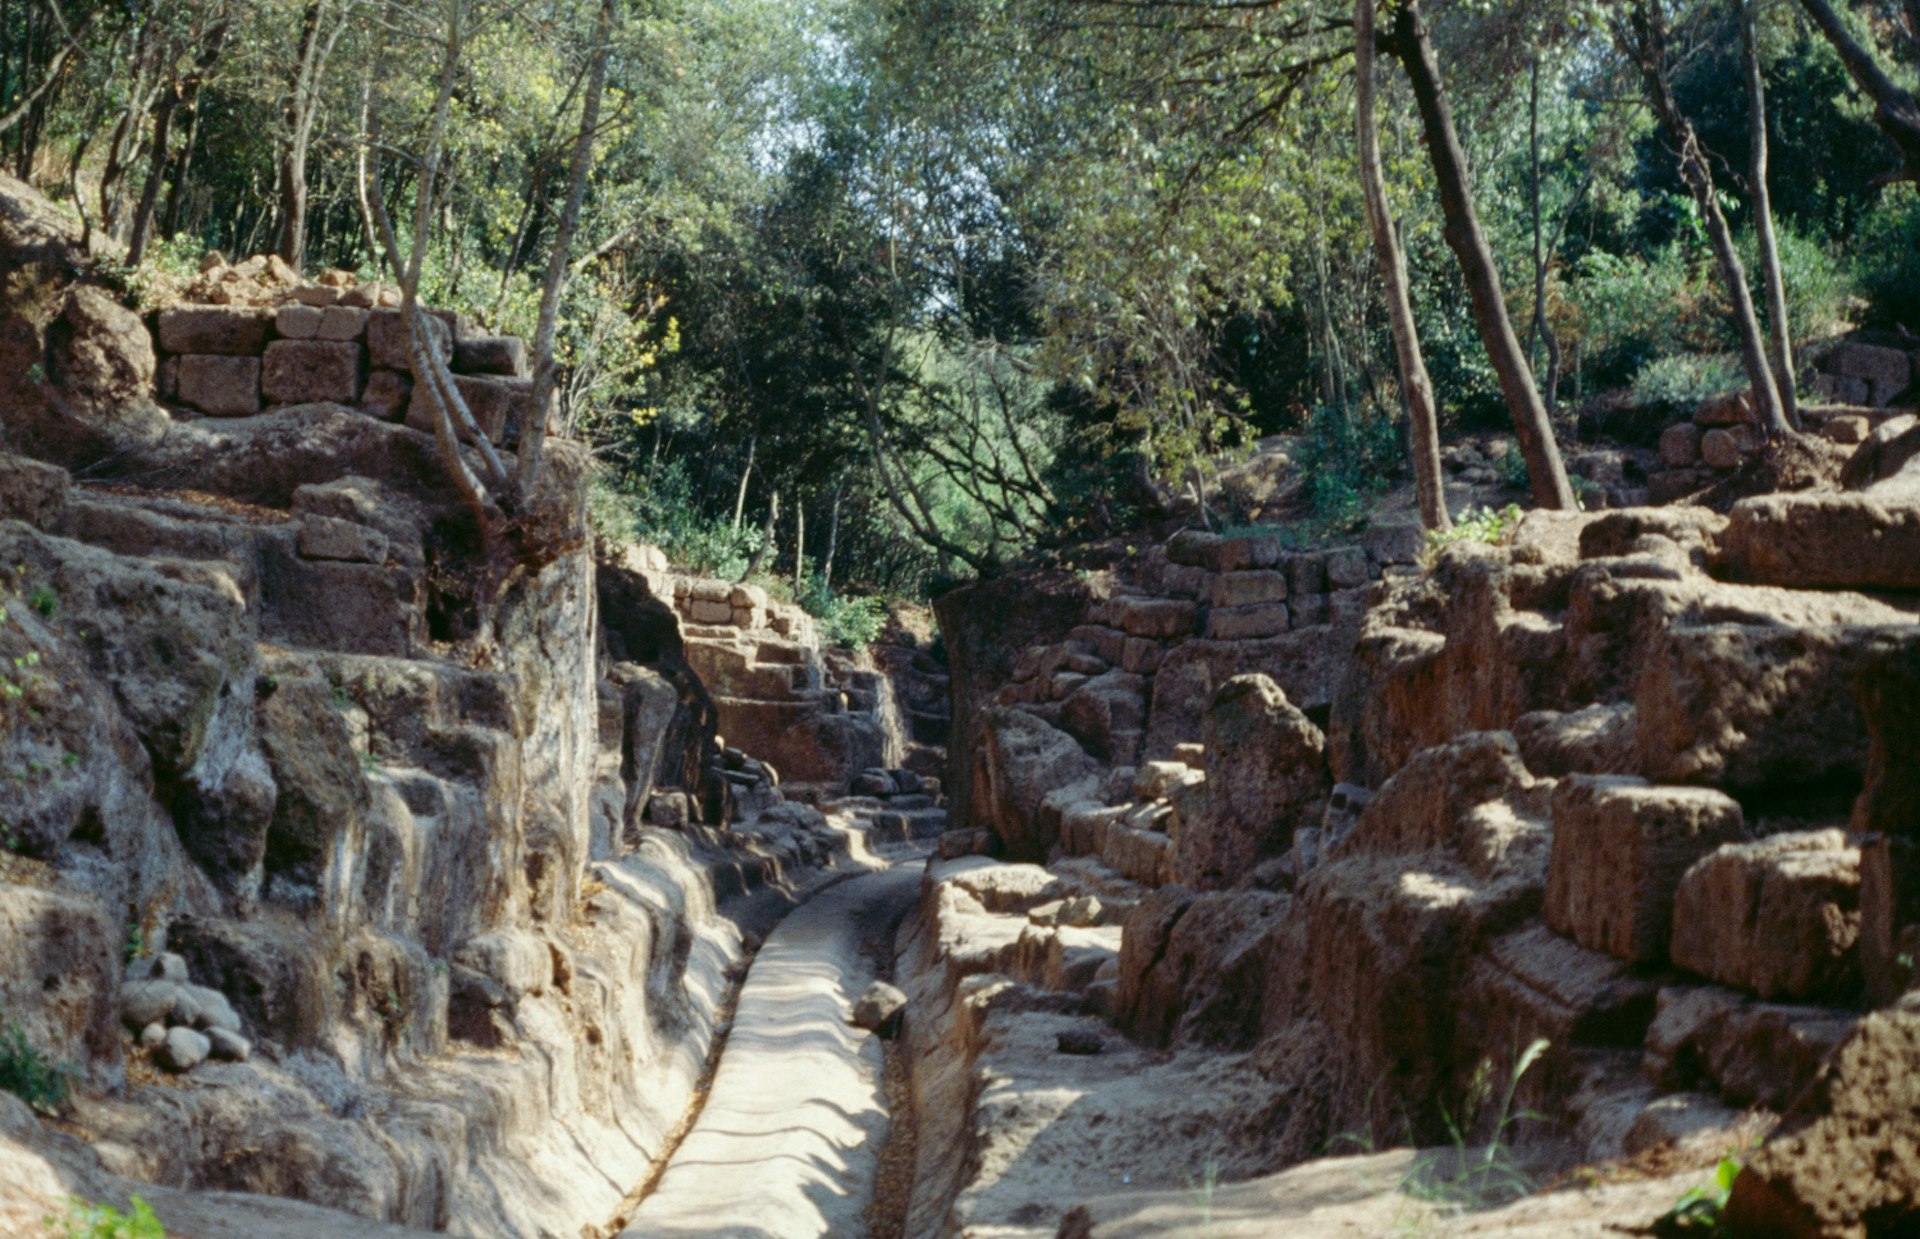 Discover your inner archaeologist by exploring the Necropoli di Banditaccia at Cerveteri.